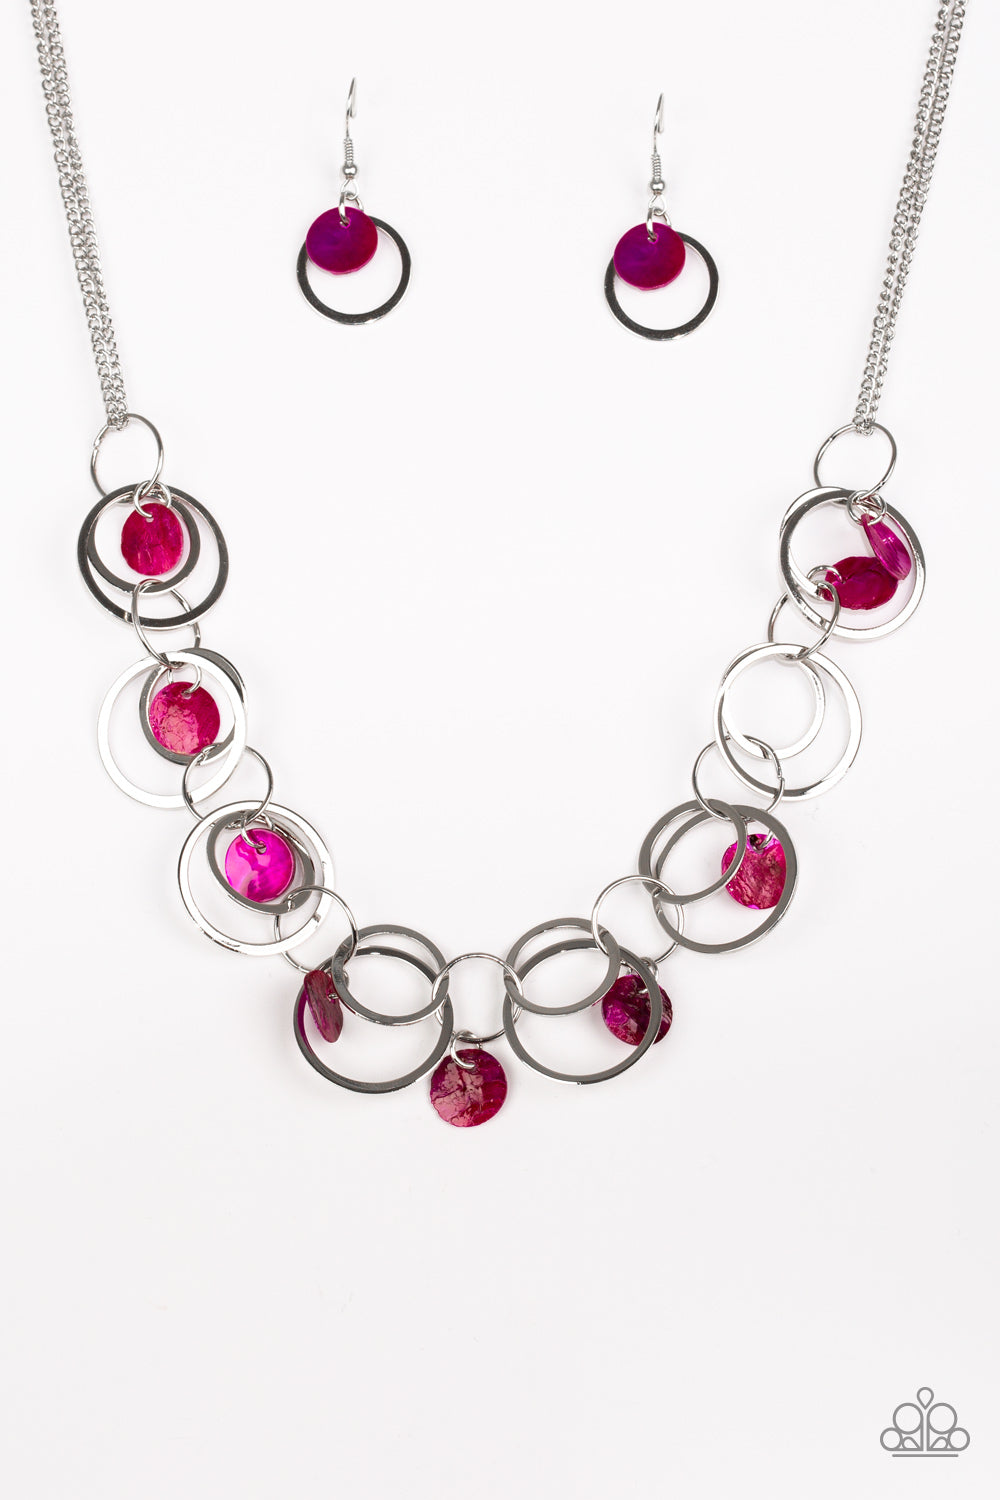 A HOT SHELL-ER  -  PINK NECKLACE